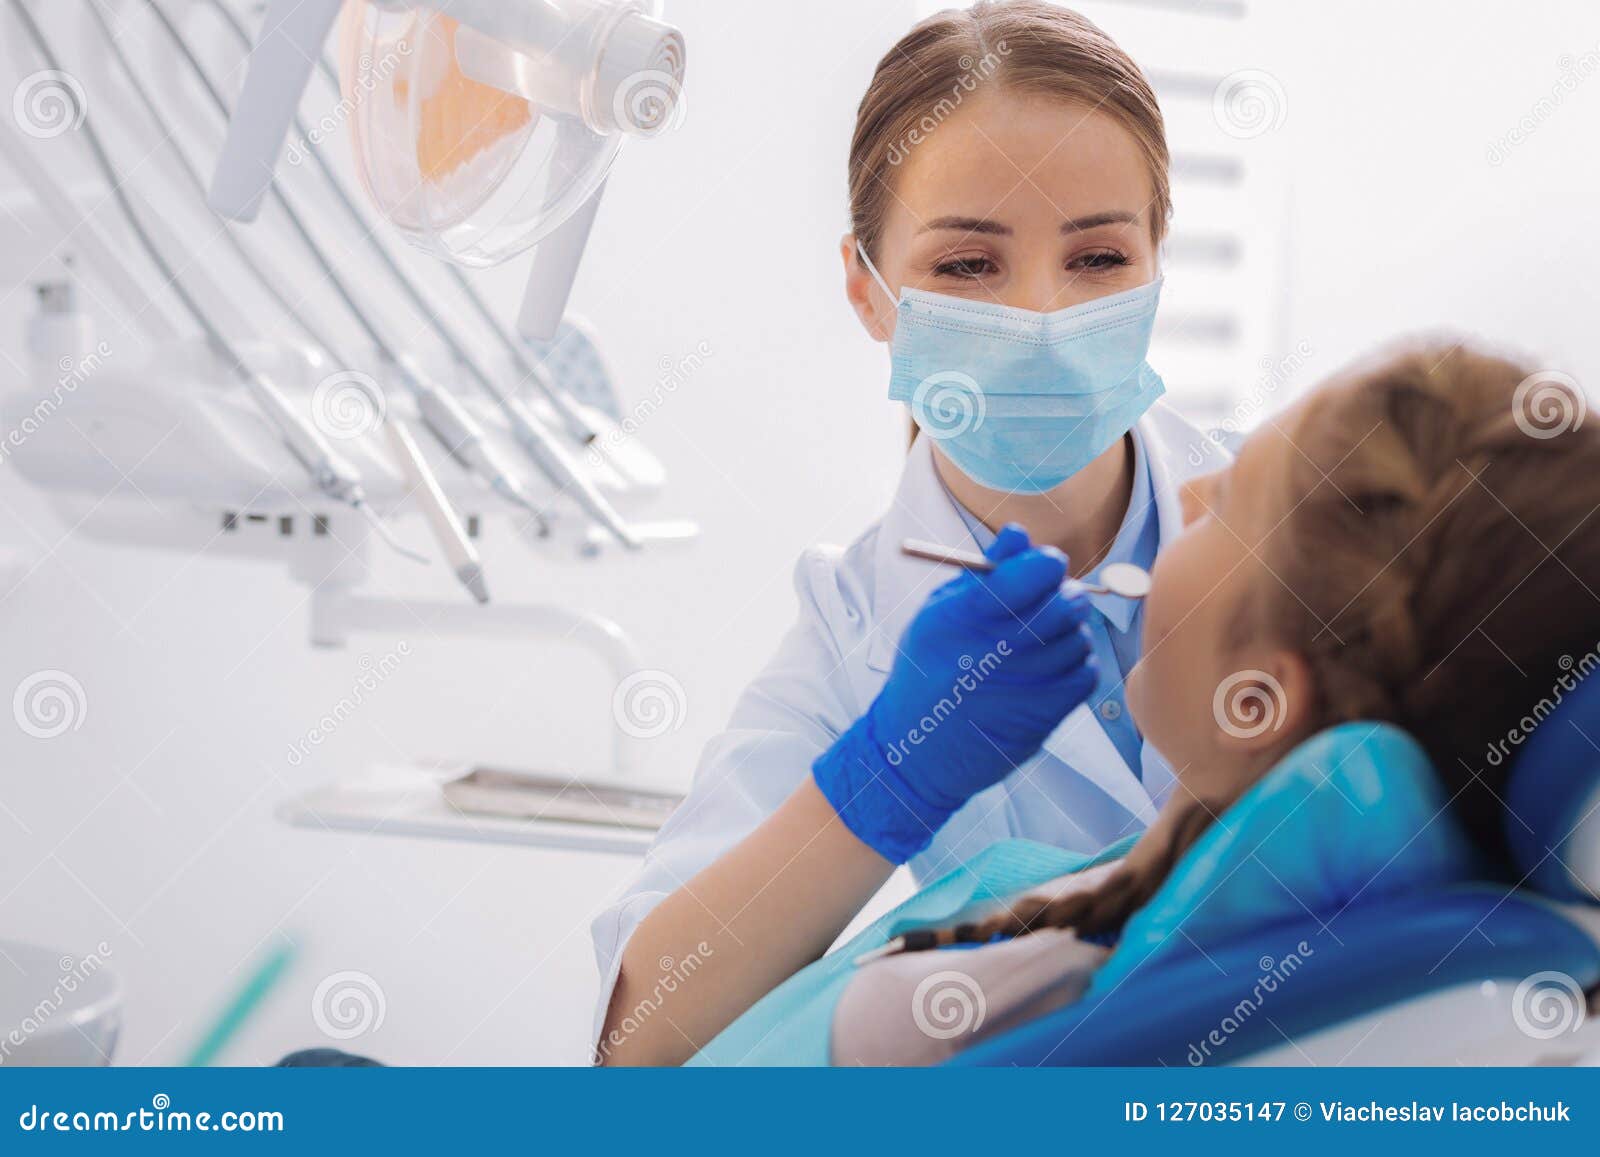 kind orthodontist holding a dental mirror while working